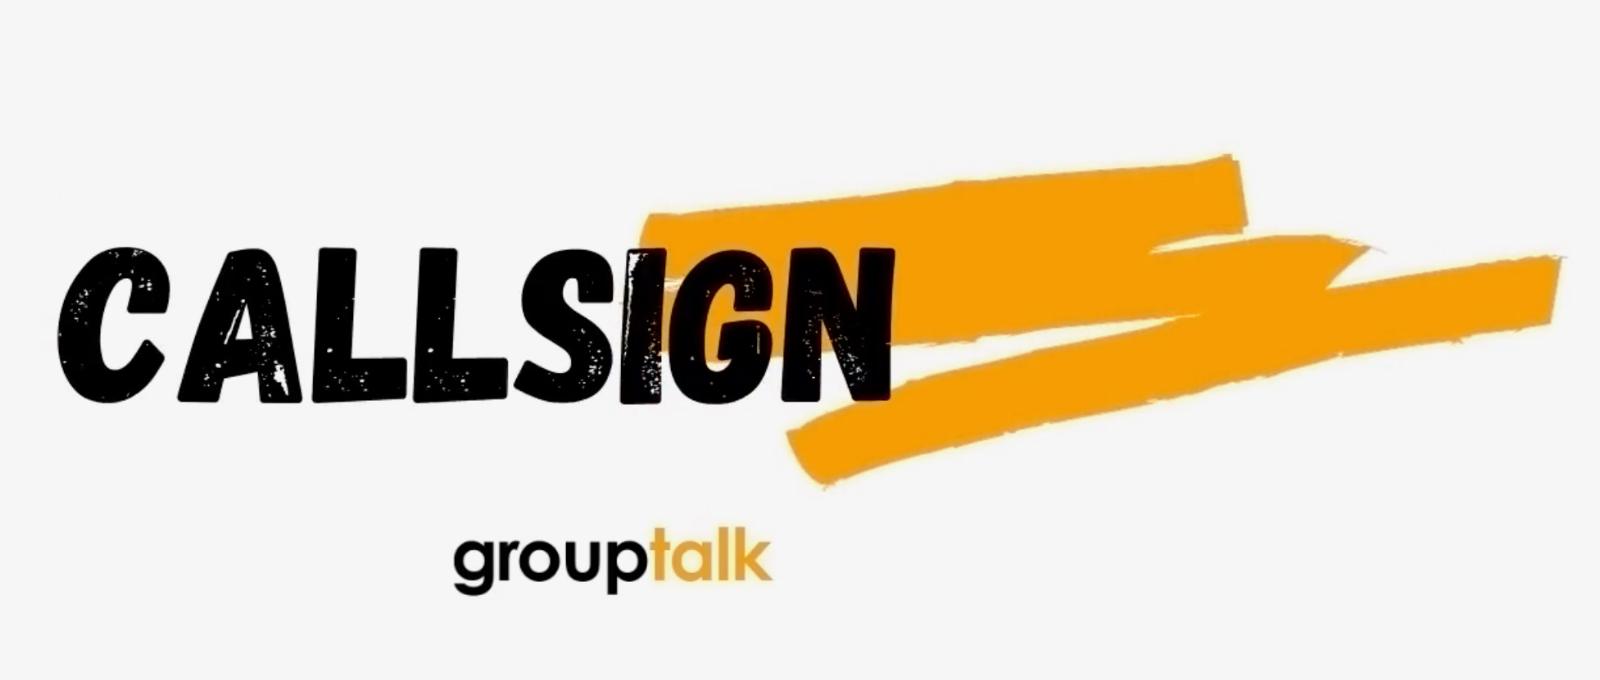 GroupTalk logo with the text callsign